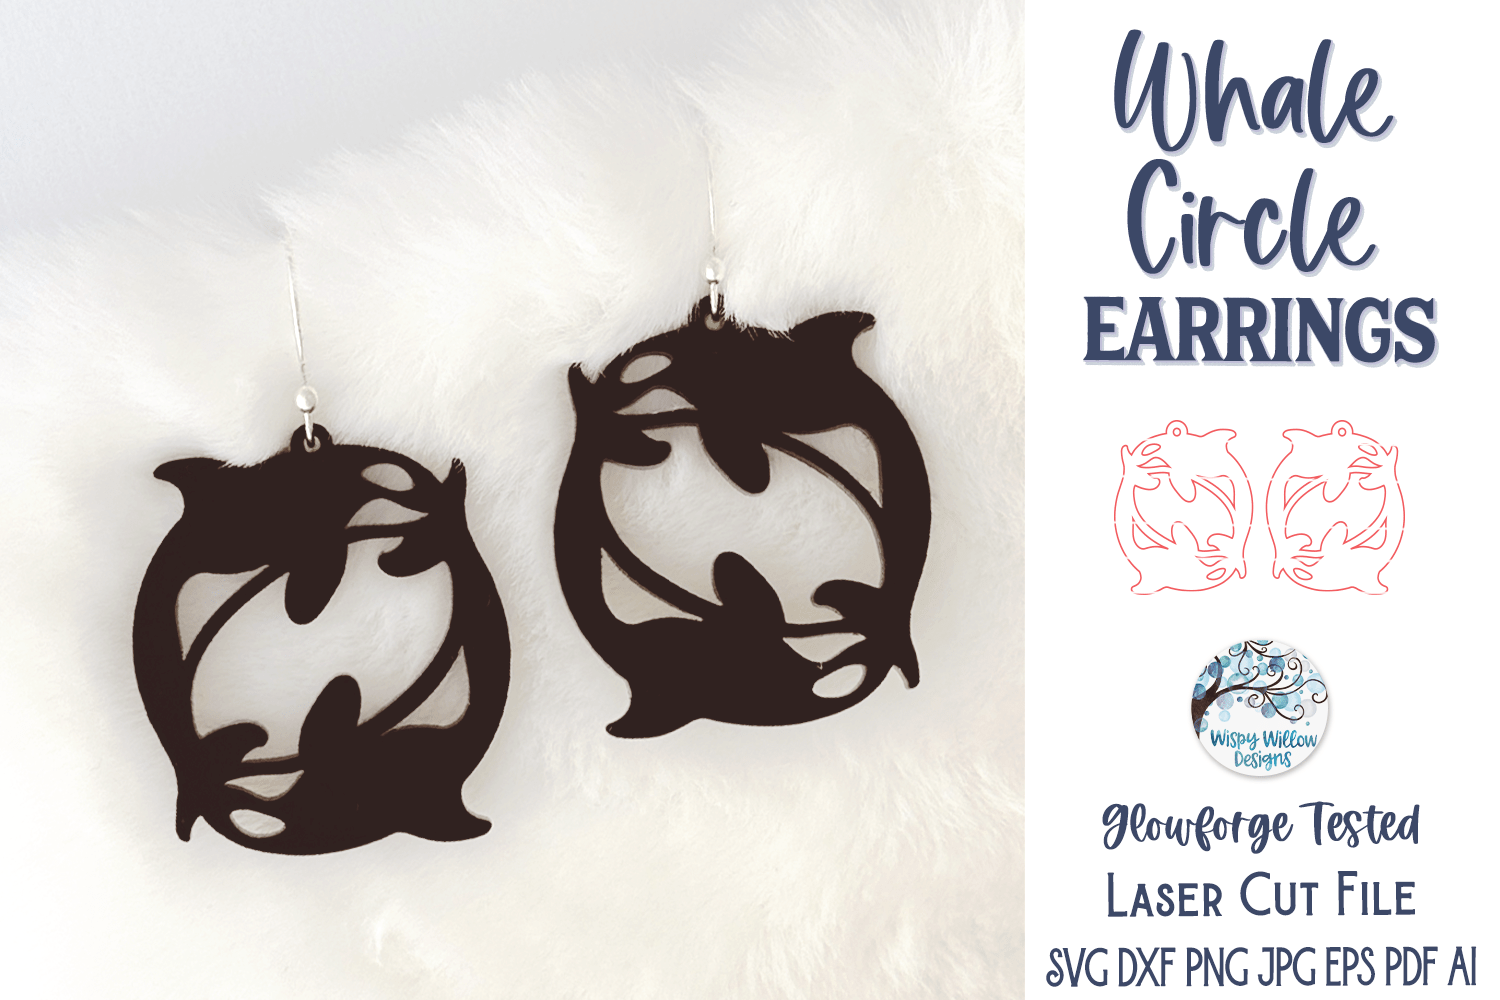 Orca Killer Whale Circle Earring SVG for Glowforge Laser Cutter Wispy Willow Designs Company